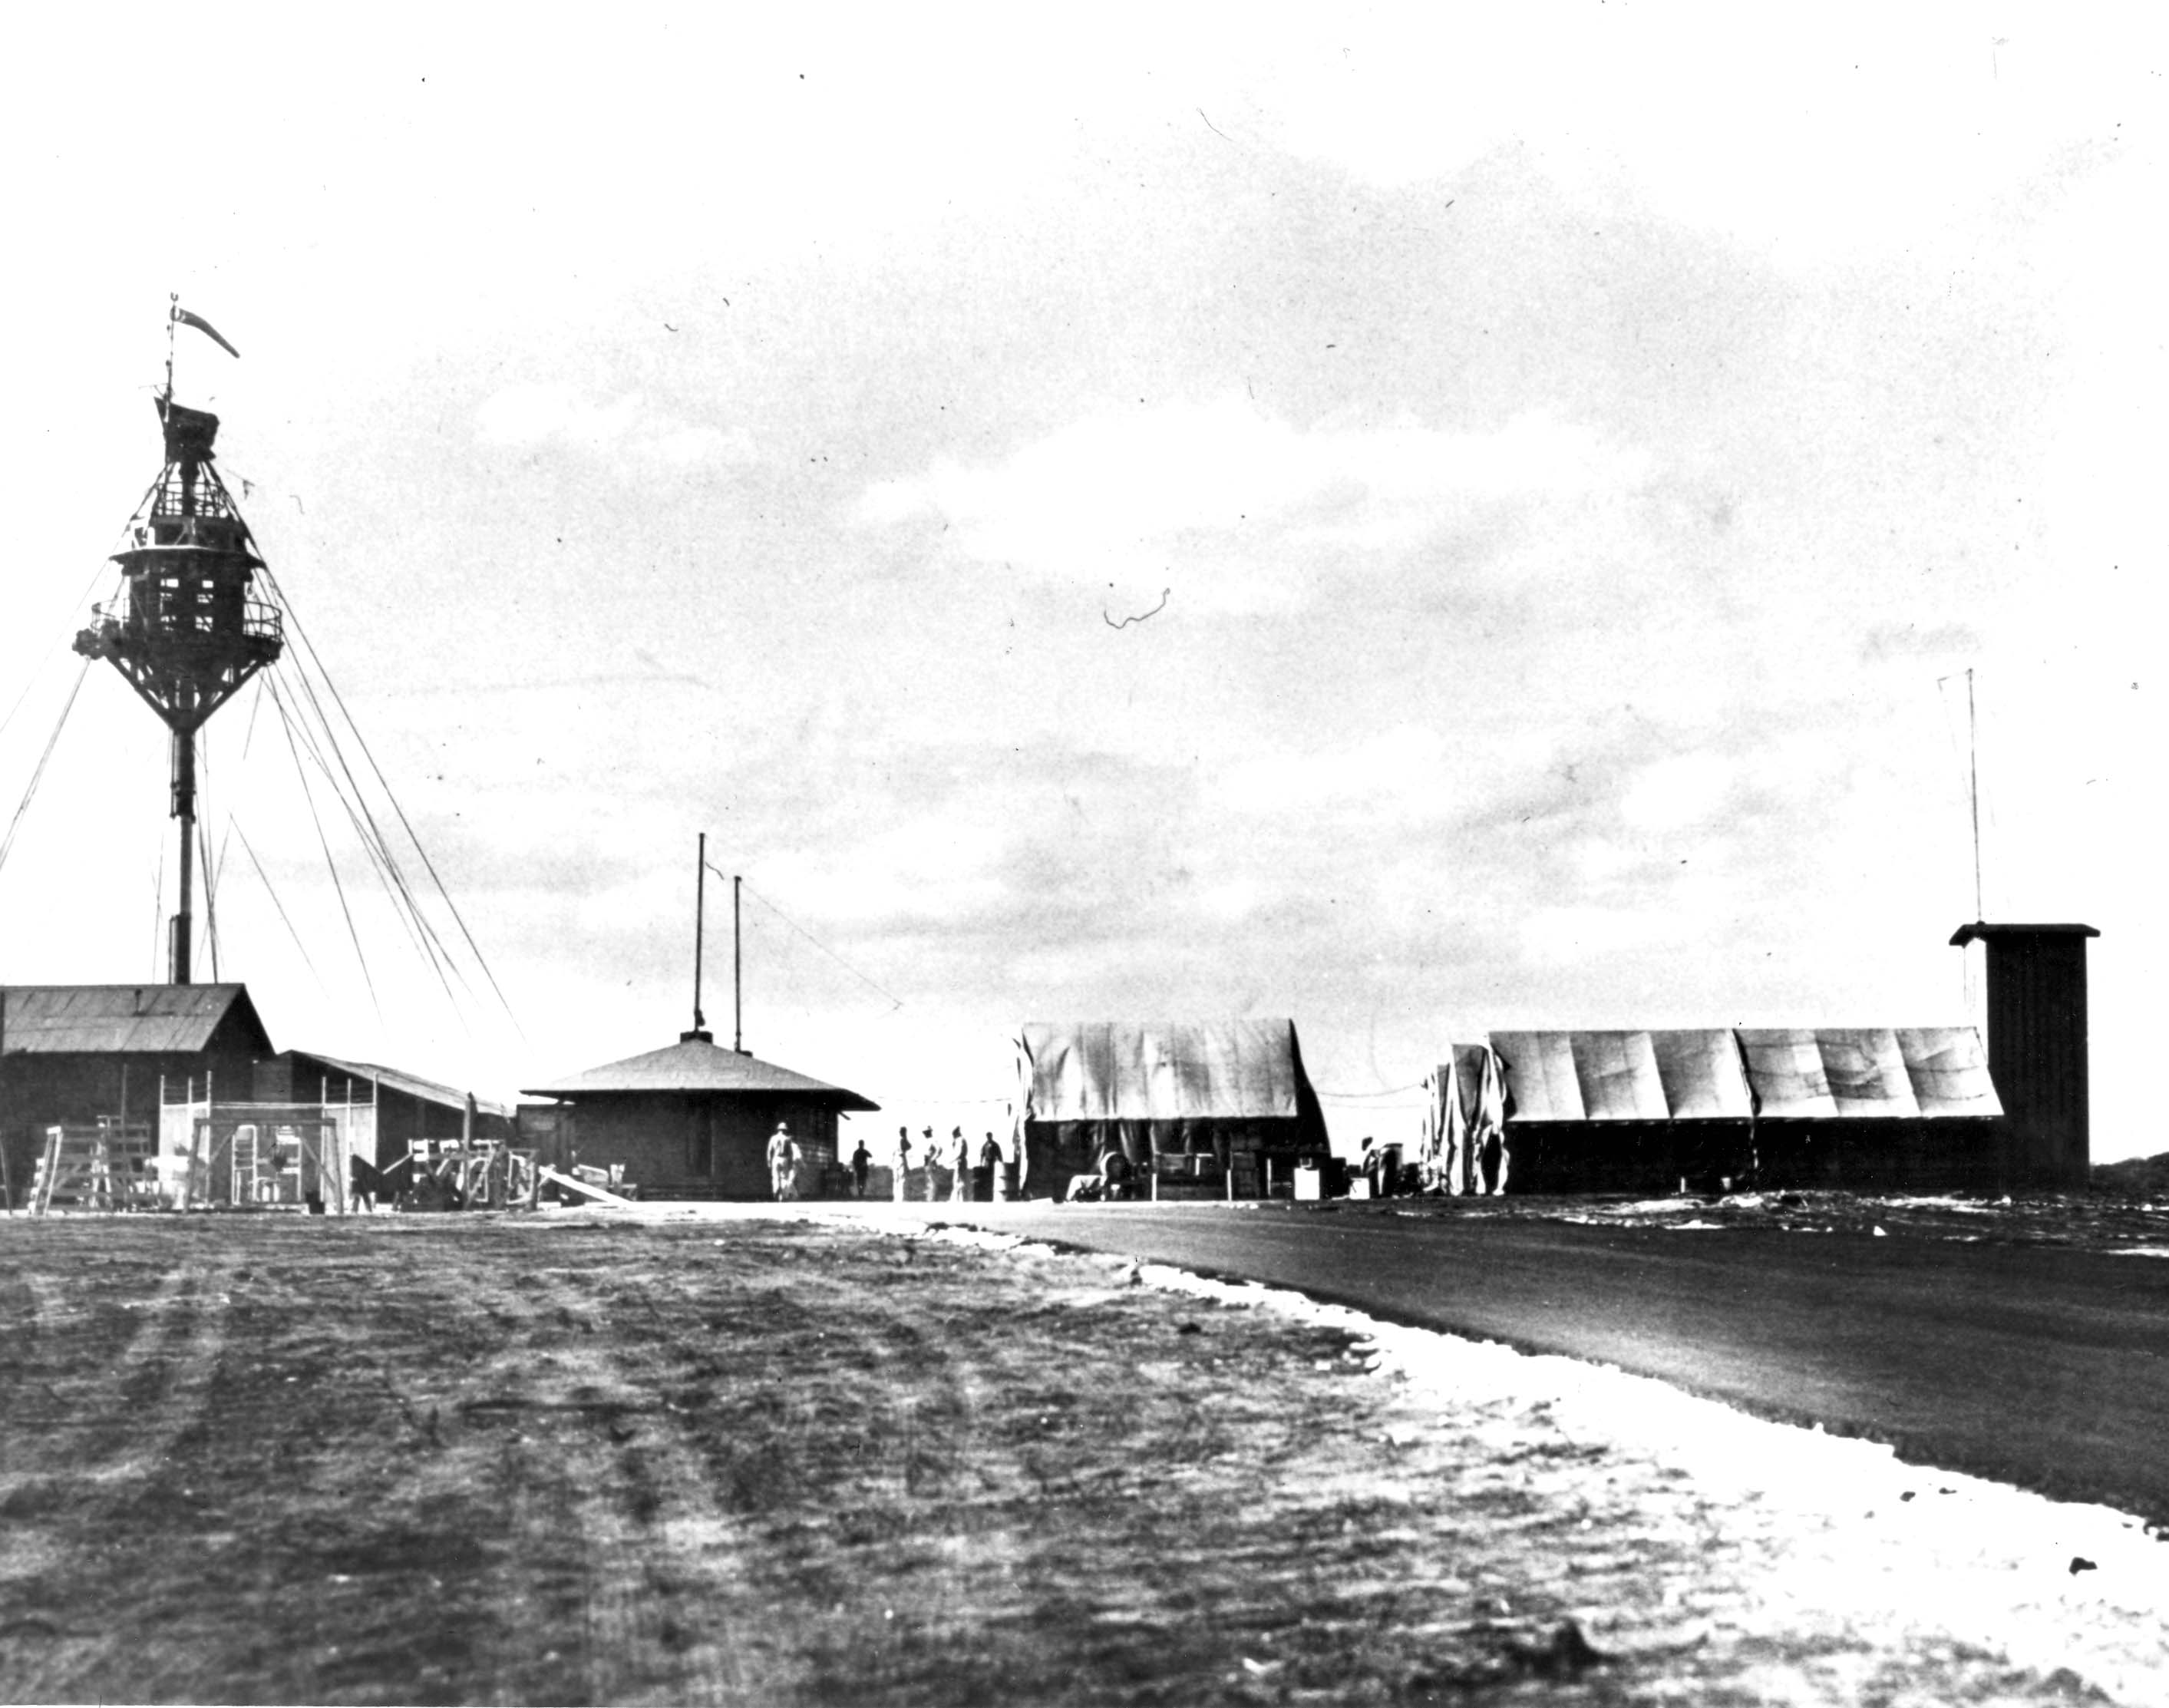 Marine Corps Air Station Ewa, Oahu, Hawaii shortly after commissioning, Feb 1941 showing the crow’s nest of the mooring mast converted into the airstrip’s control tower.